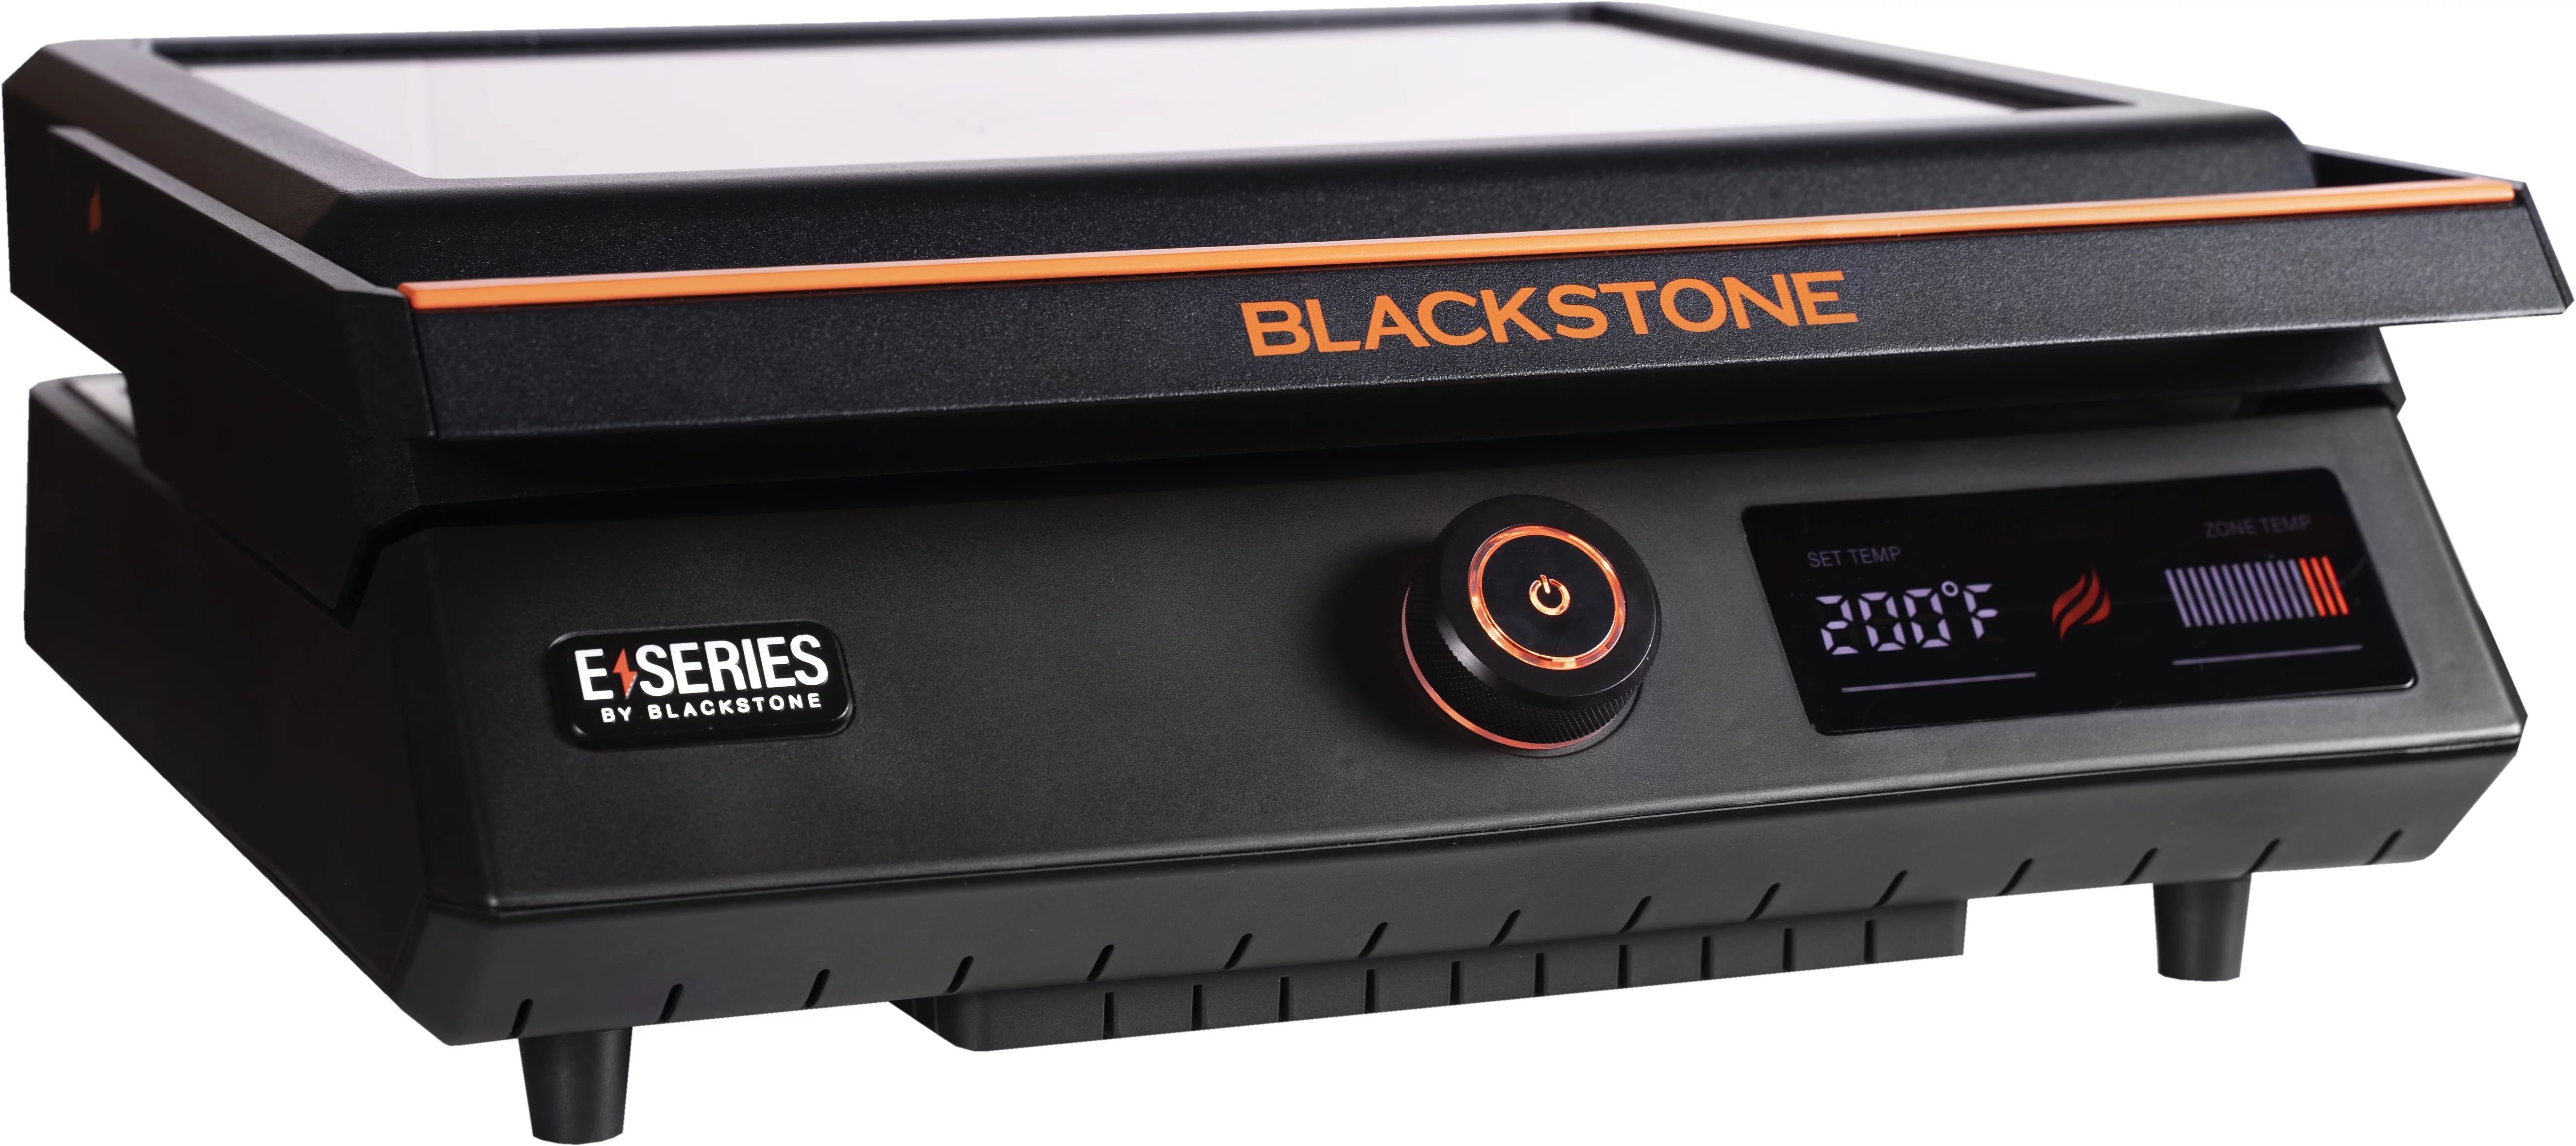 Blackstone E-Series 17" Electric Tabletop Griddle with Hood | Walmart (US)